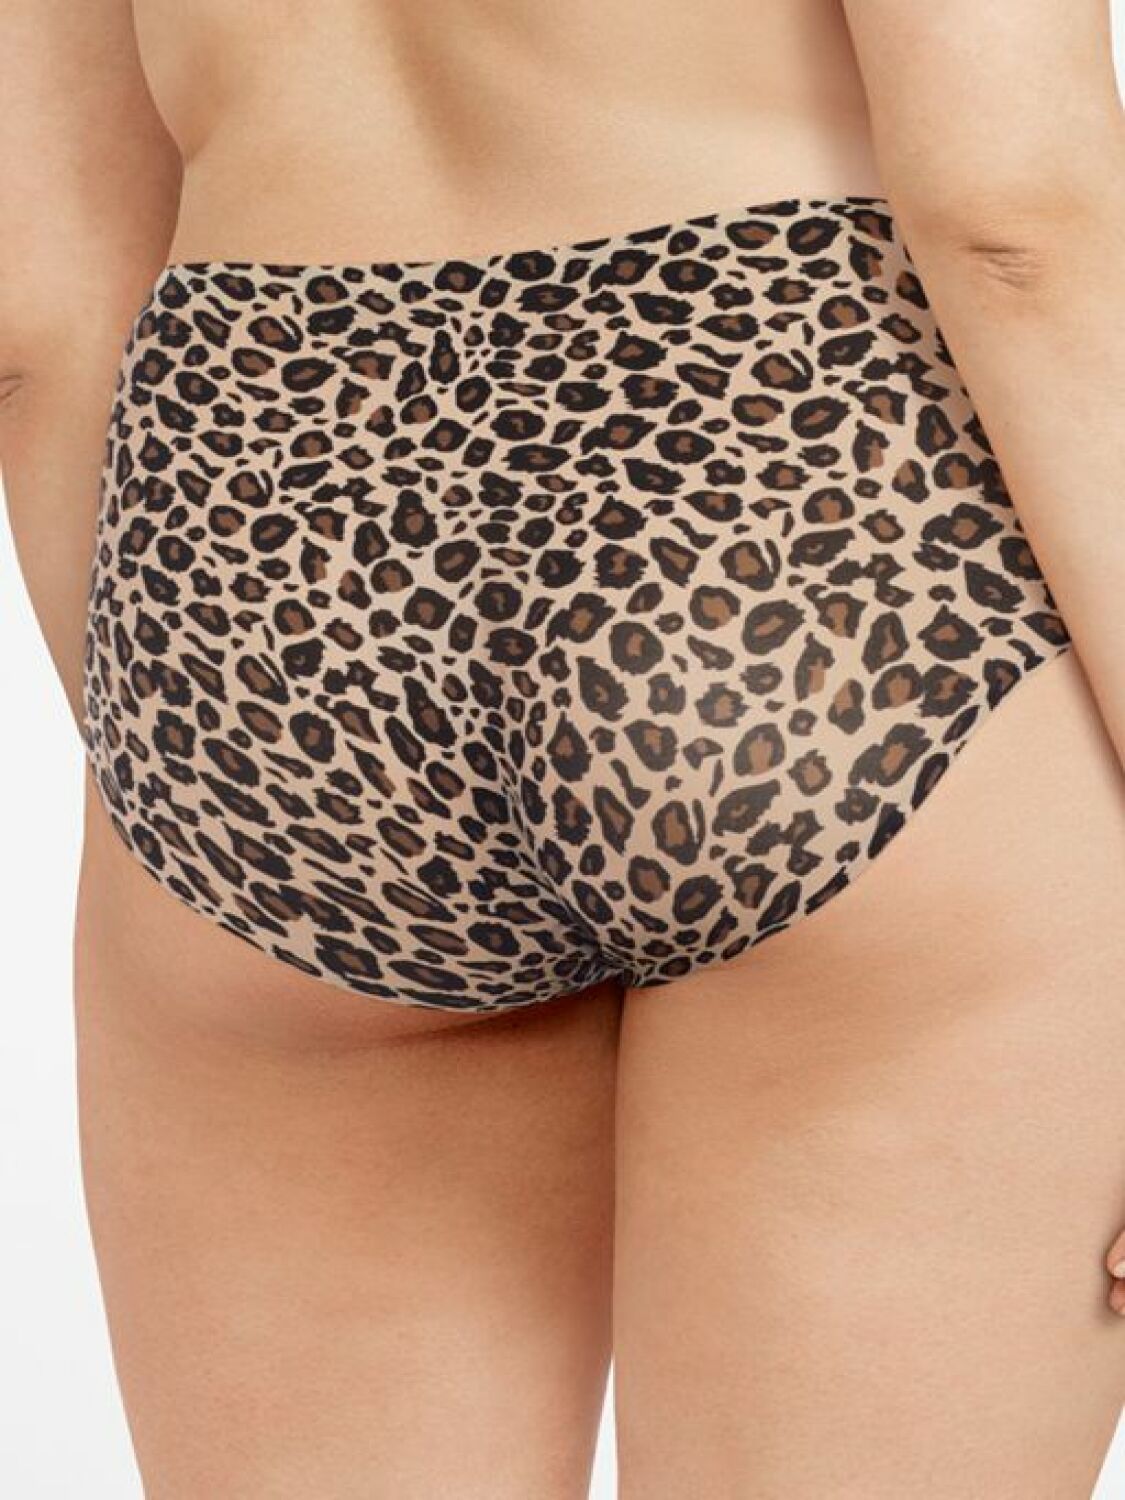 Chantelle Taillenslip ONE SIZE SoftStretch Farbe Animal Print